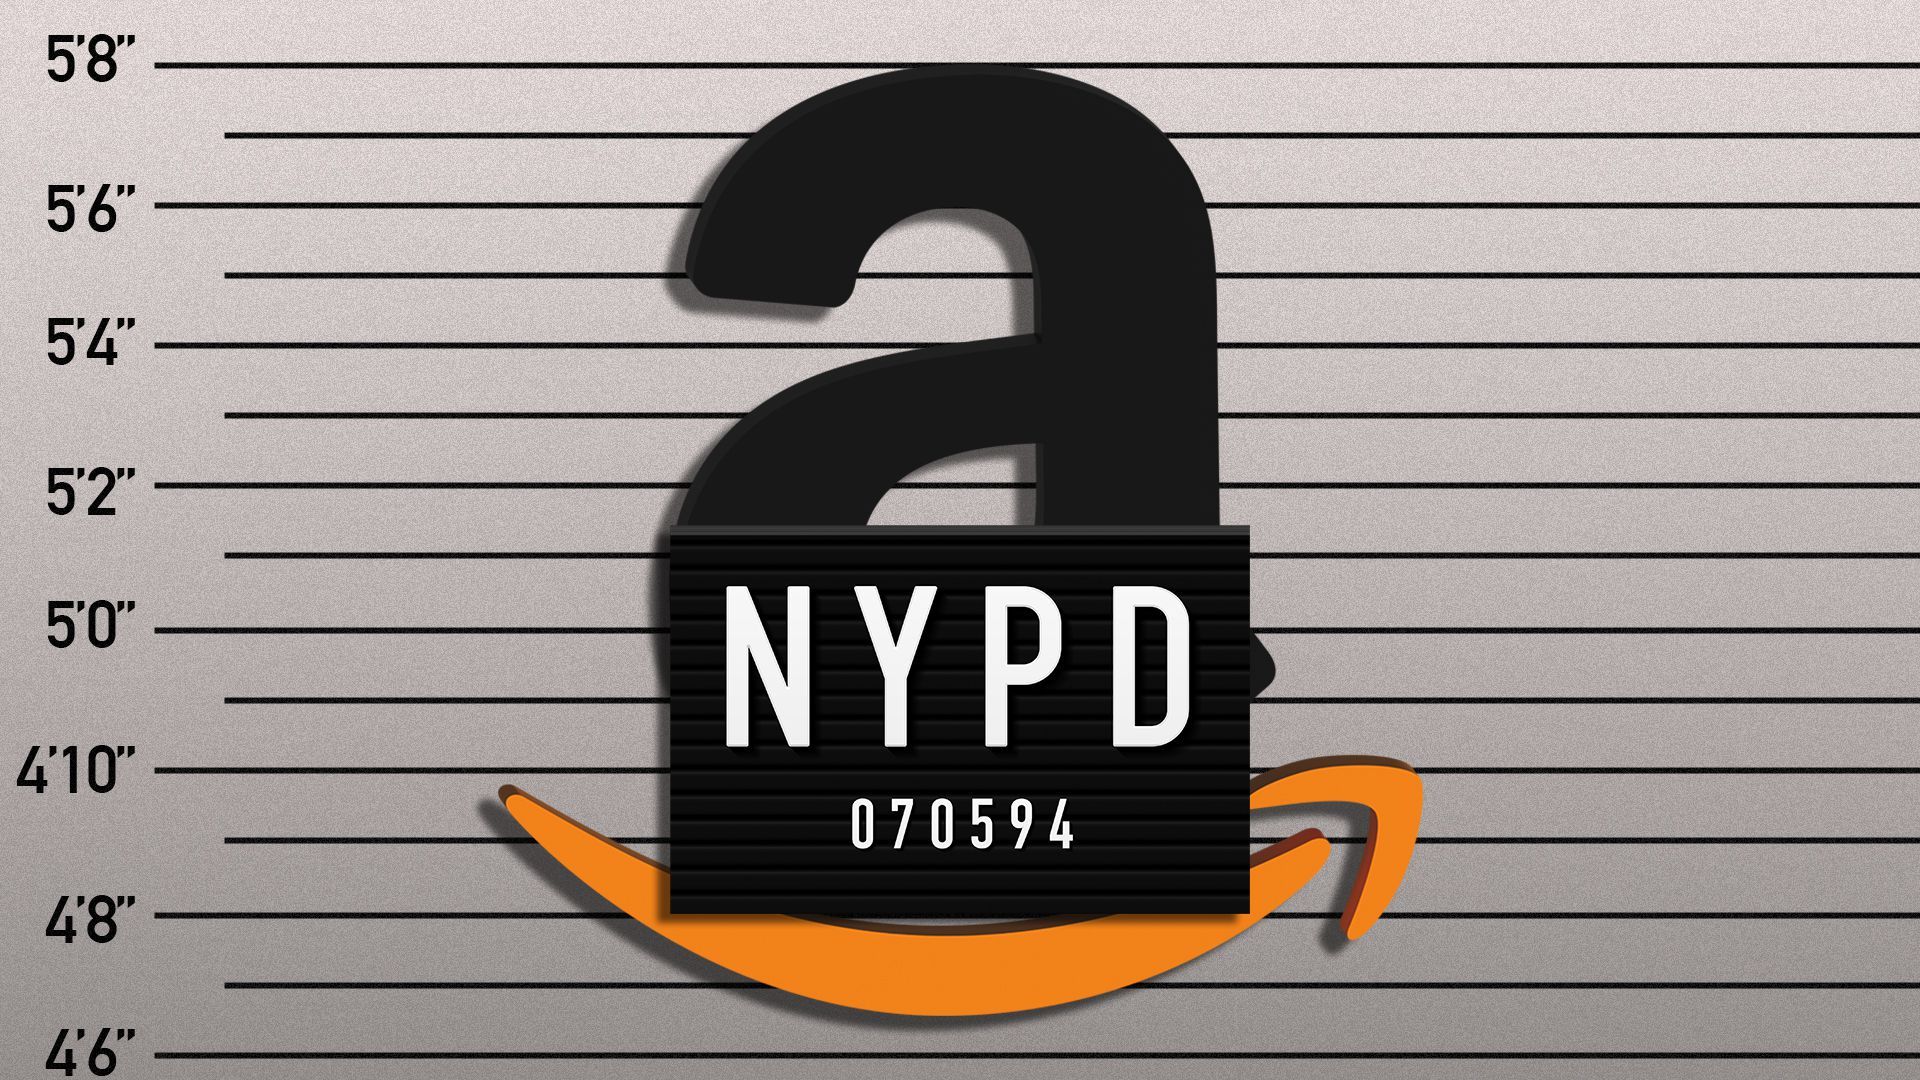 Illustration of the Amazon logo taking a mugshot photo holding a board that reads "NYPD 070594".